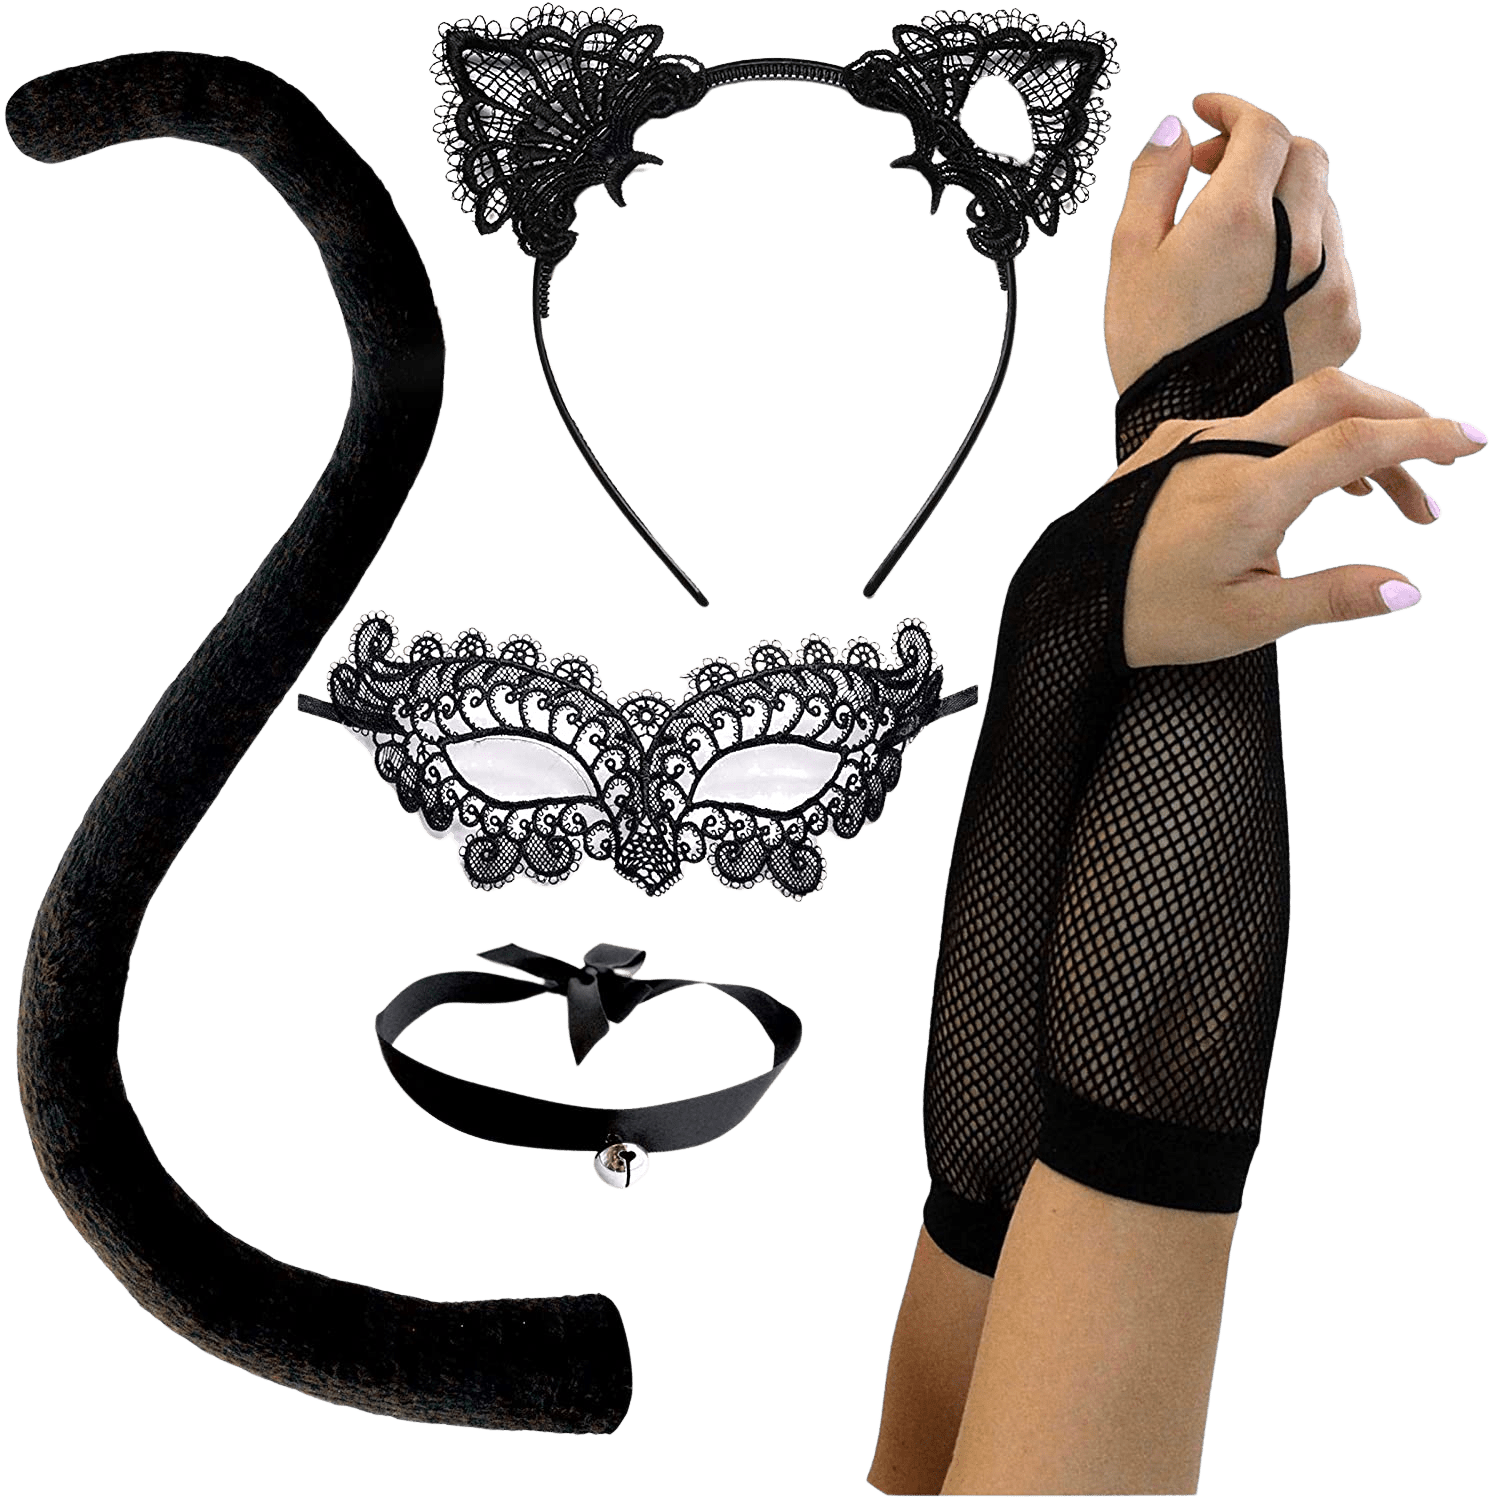 Black Cat Costume for Women Sexy Halloween Masquerade Mask, Lace Ears, Gloves, Tail, Choker Necklace | Decor Gifts and More